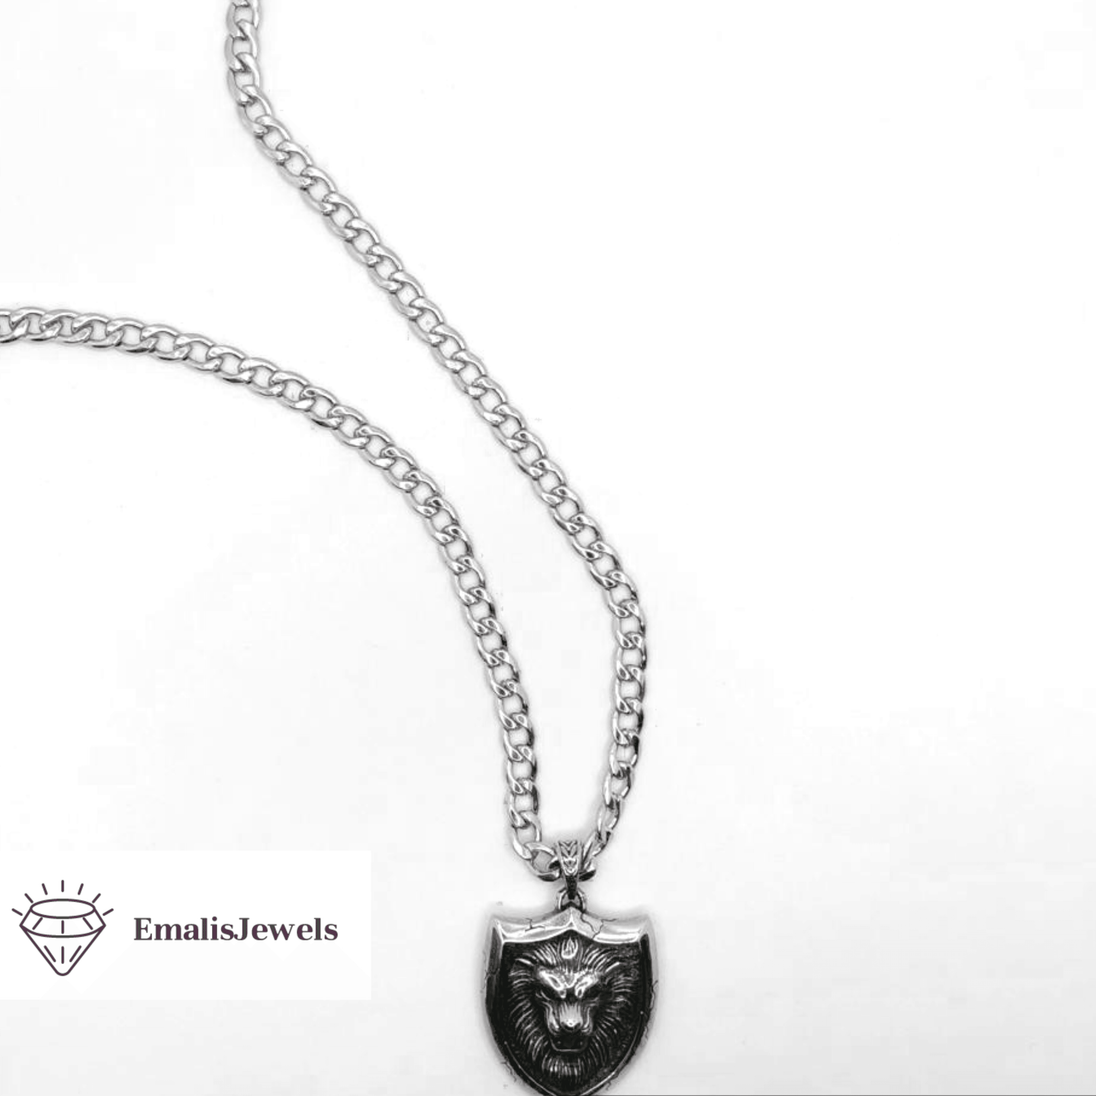 Stainless Steel Chain Necklace and Stainless Steel Lion Pendant - PremiumBrandGoods